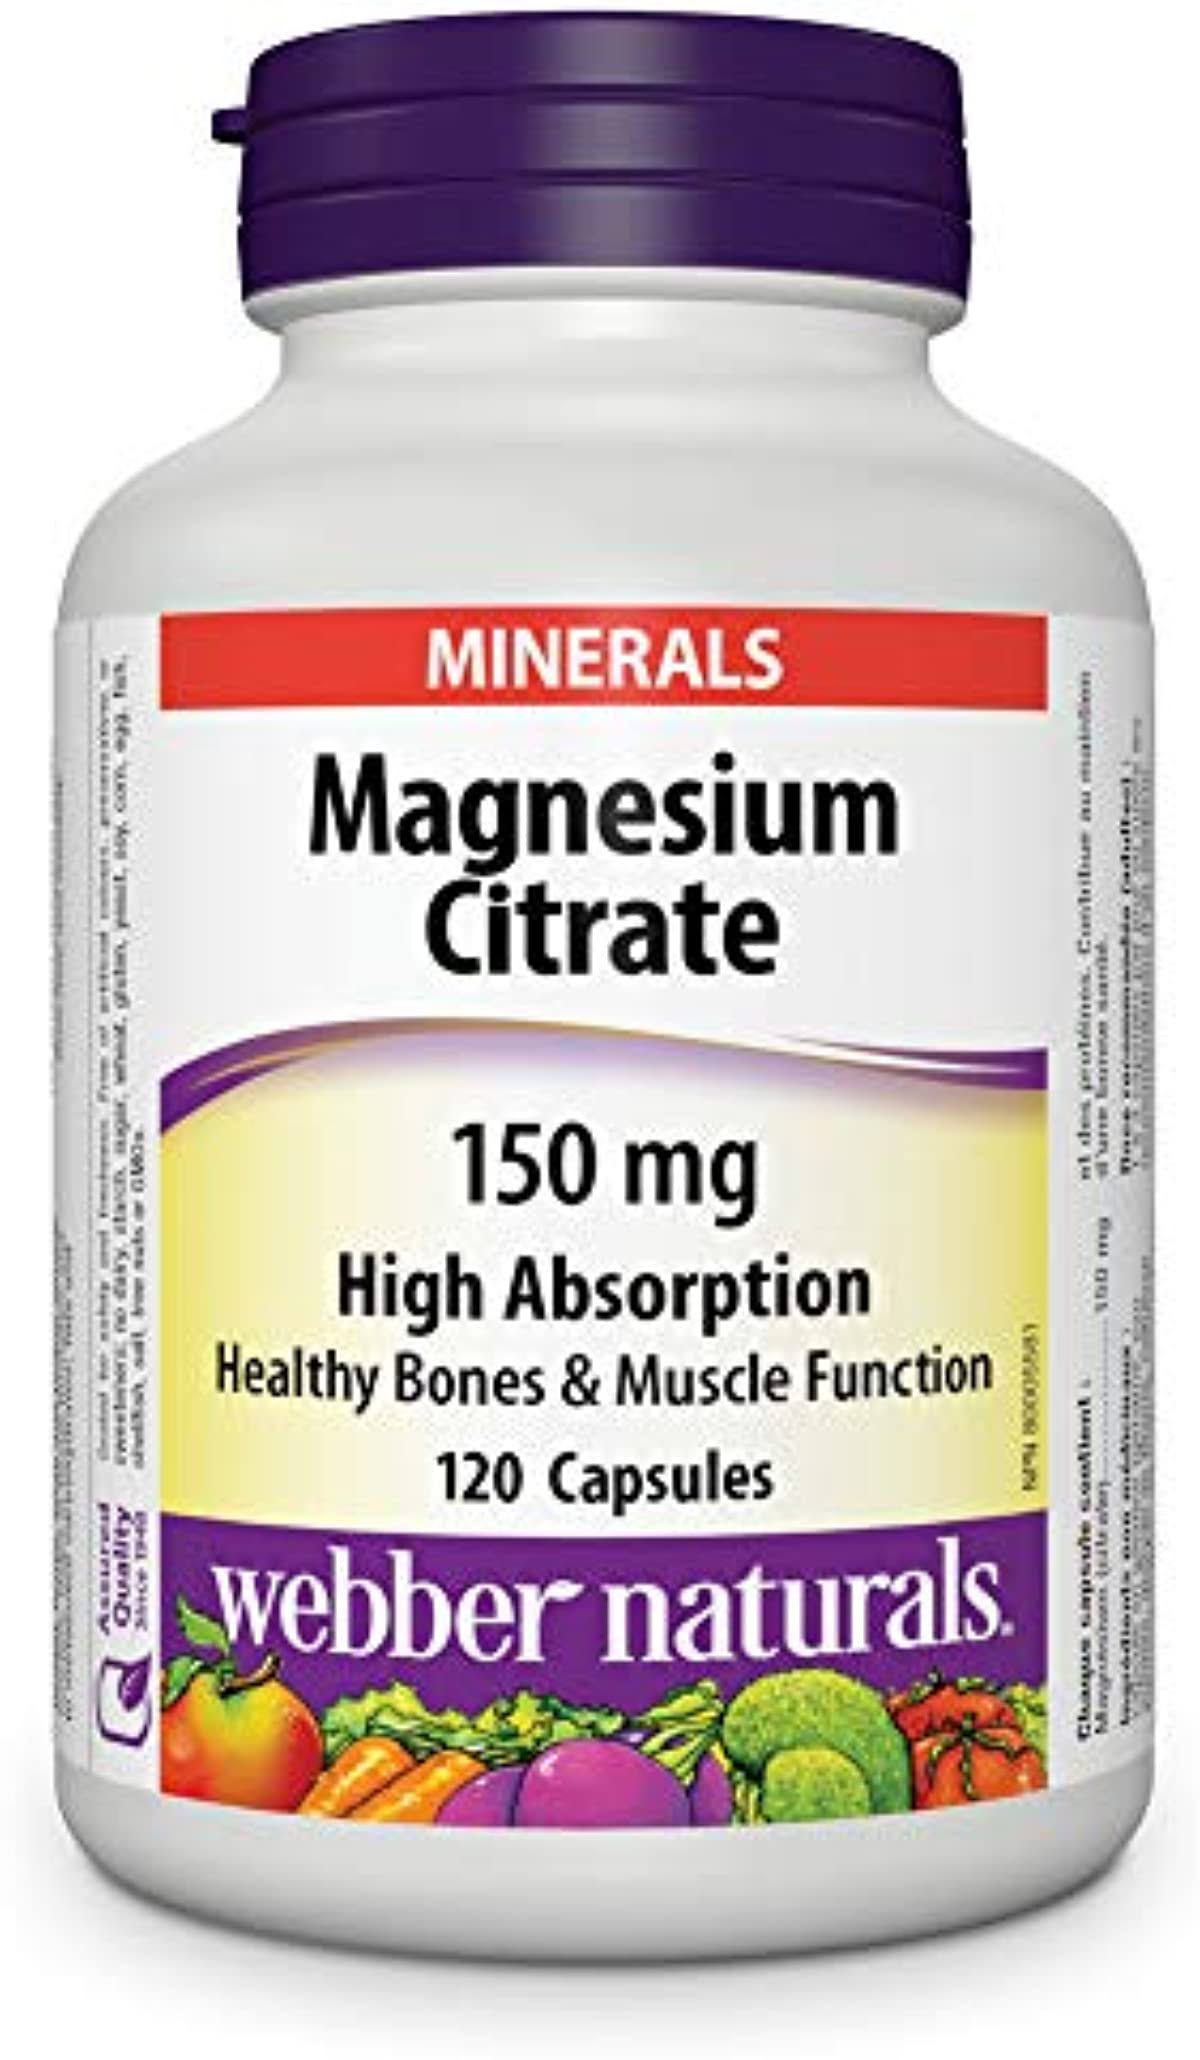 Webber Naturals Magnesium Citrates High Absorption Dietary Supplement - 150mg, 120ct